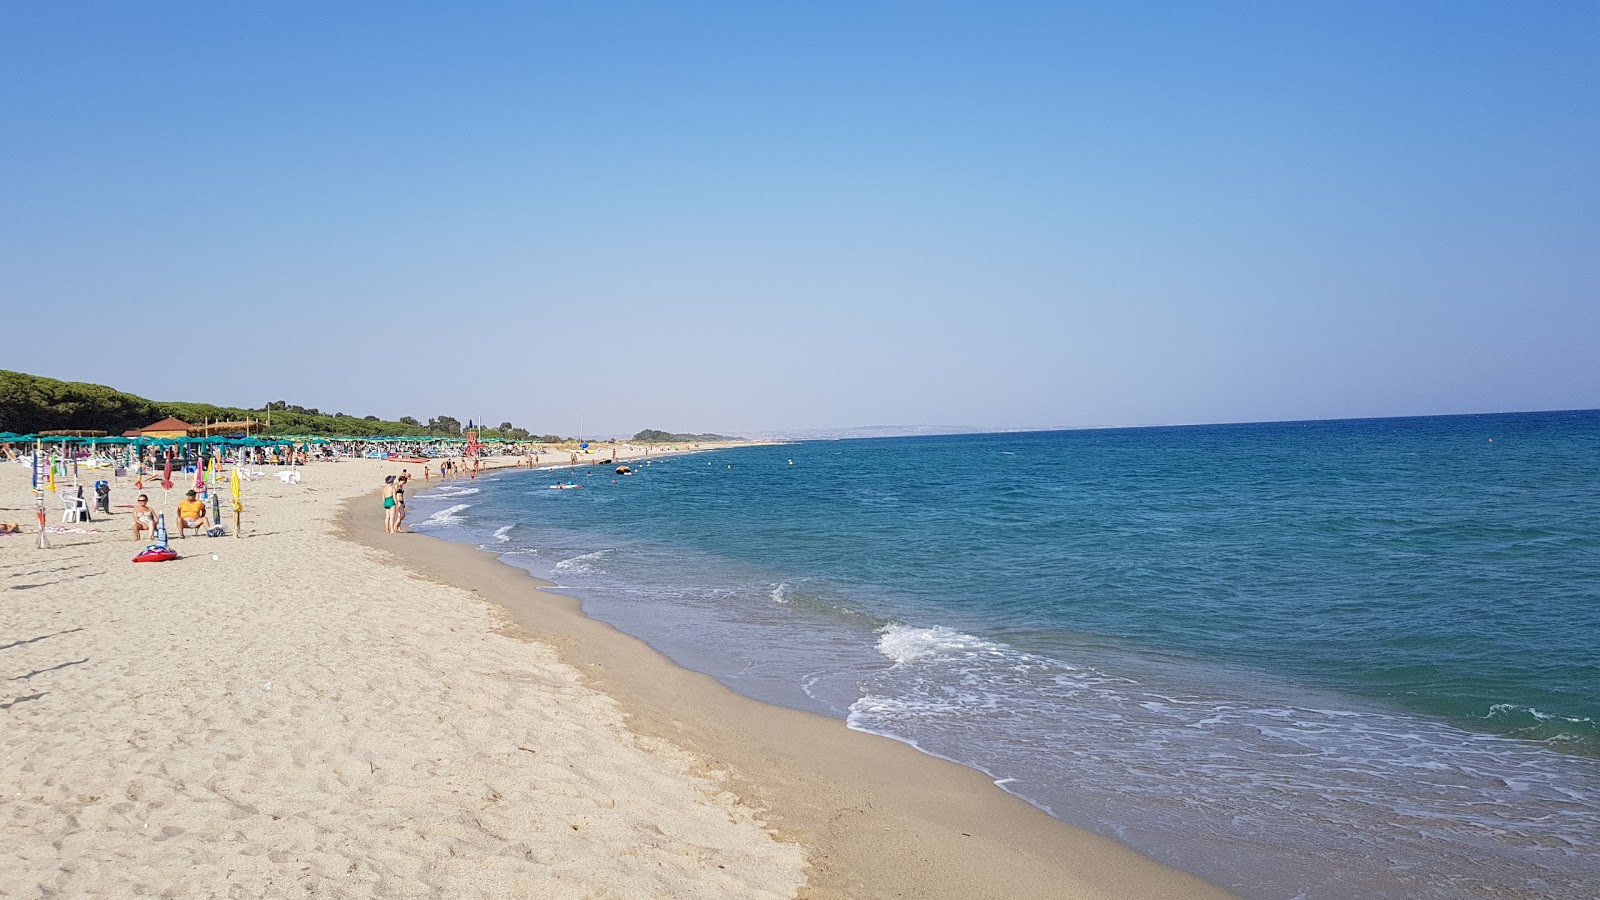 Photo of Villaggio Carrao beach with blue water surface